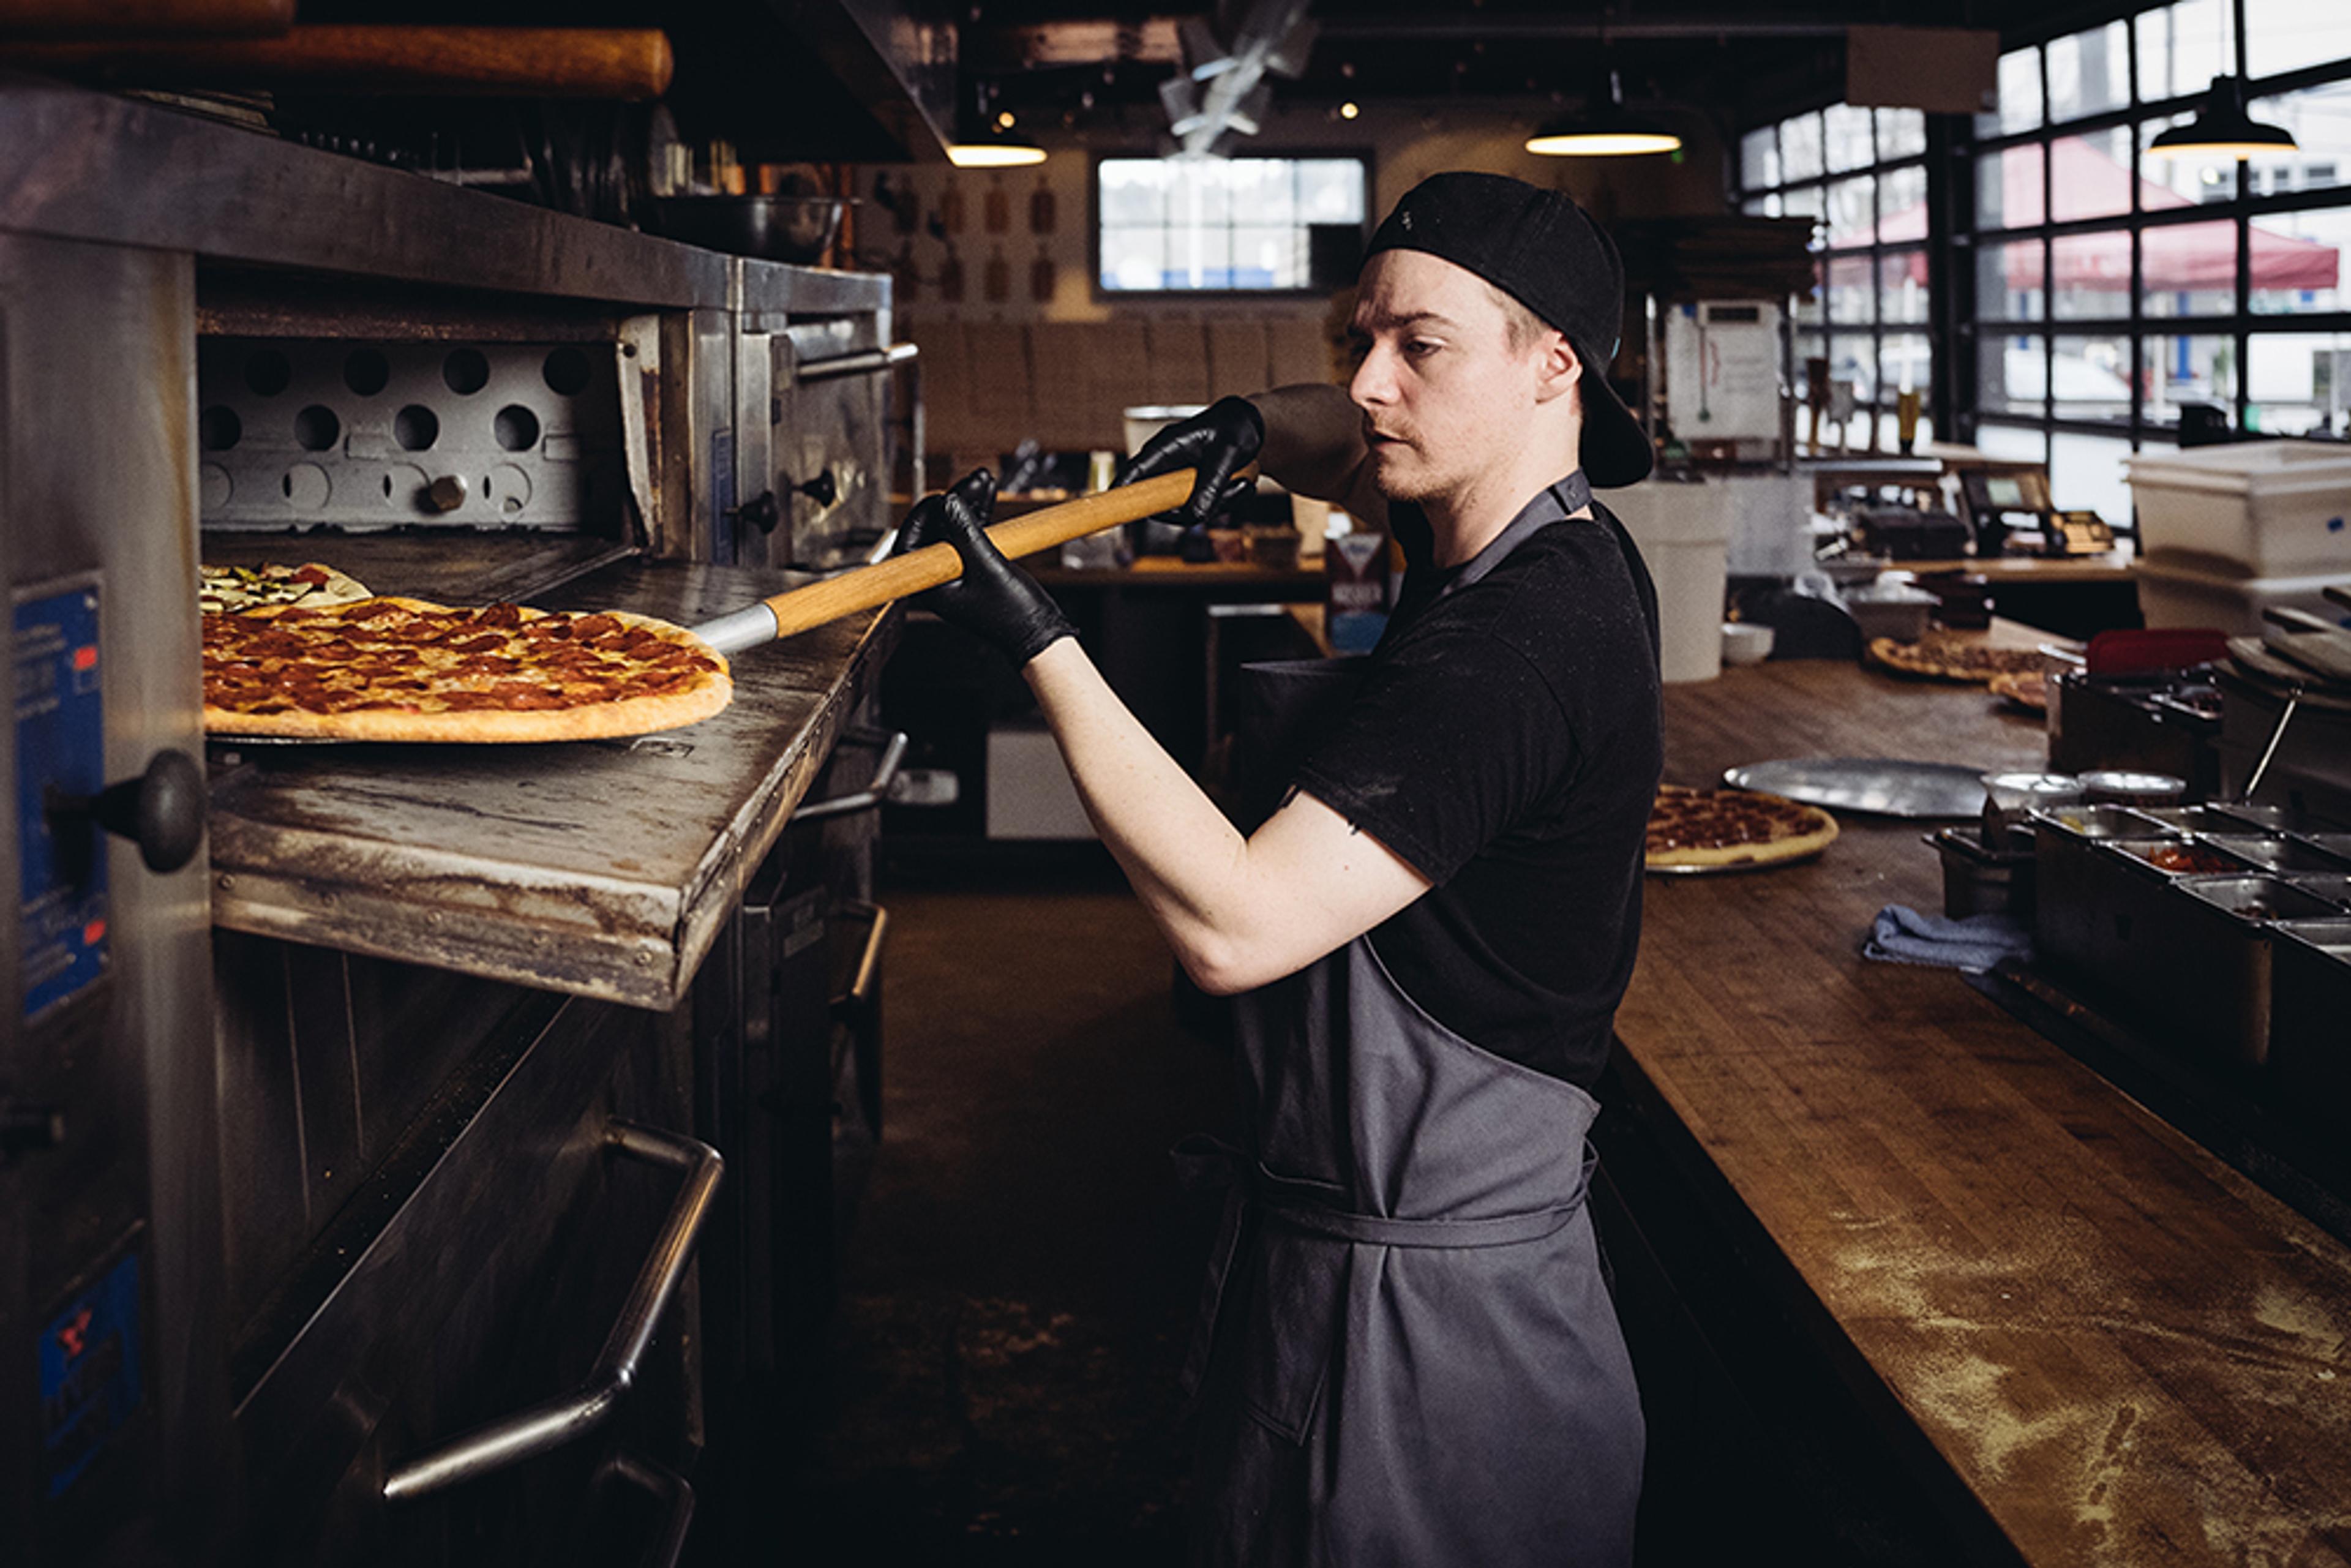 Chef placing pizza into deck oven